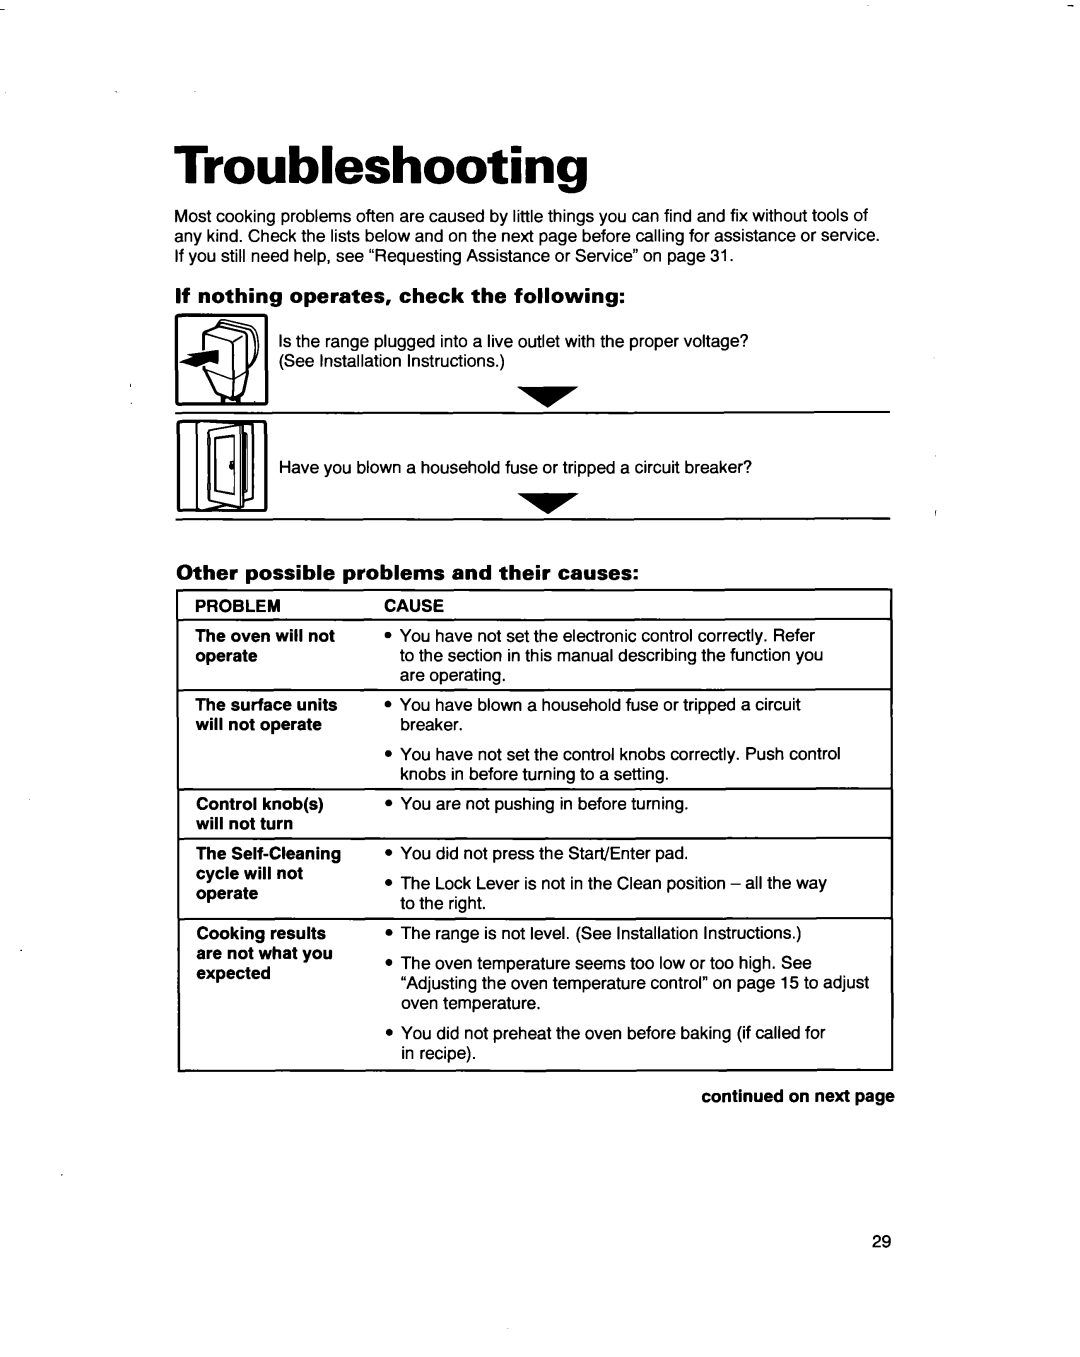 Whirlpool RF3661XD Troubleshooting, If nothing operates, check the following, Other possible problems and their causes 